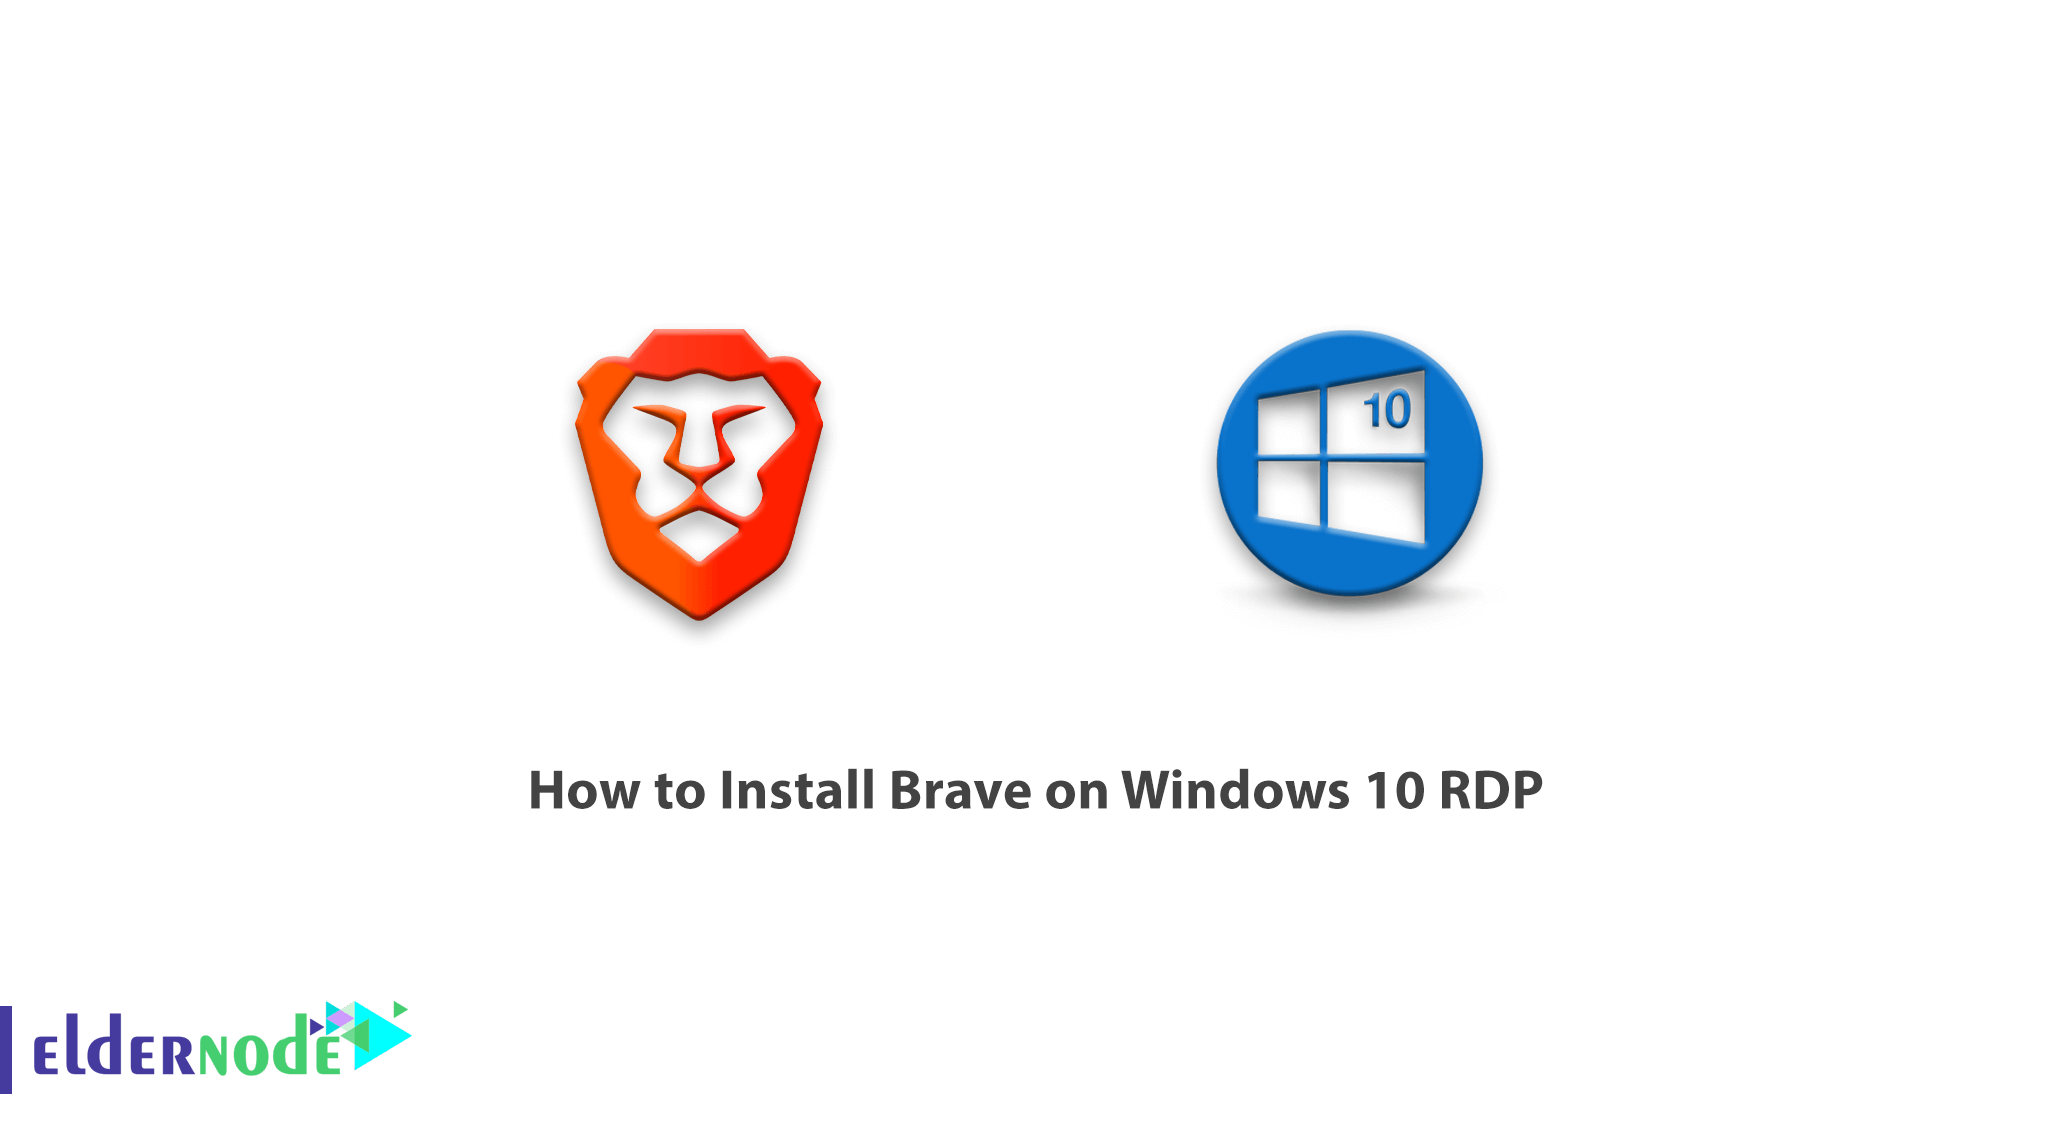 How to Install Brave on Windows 10 RDP